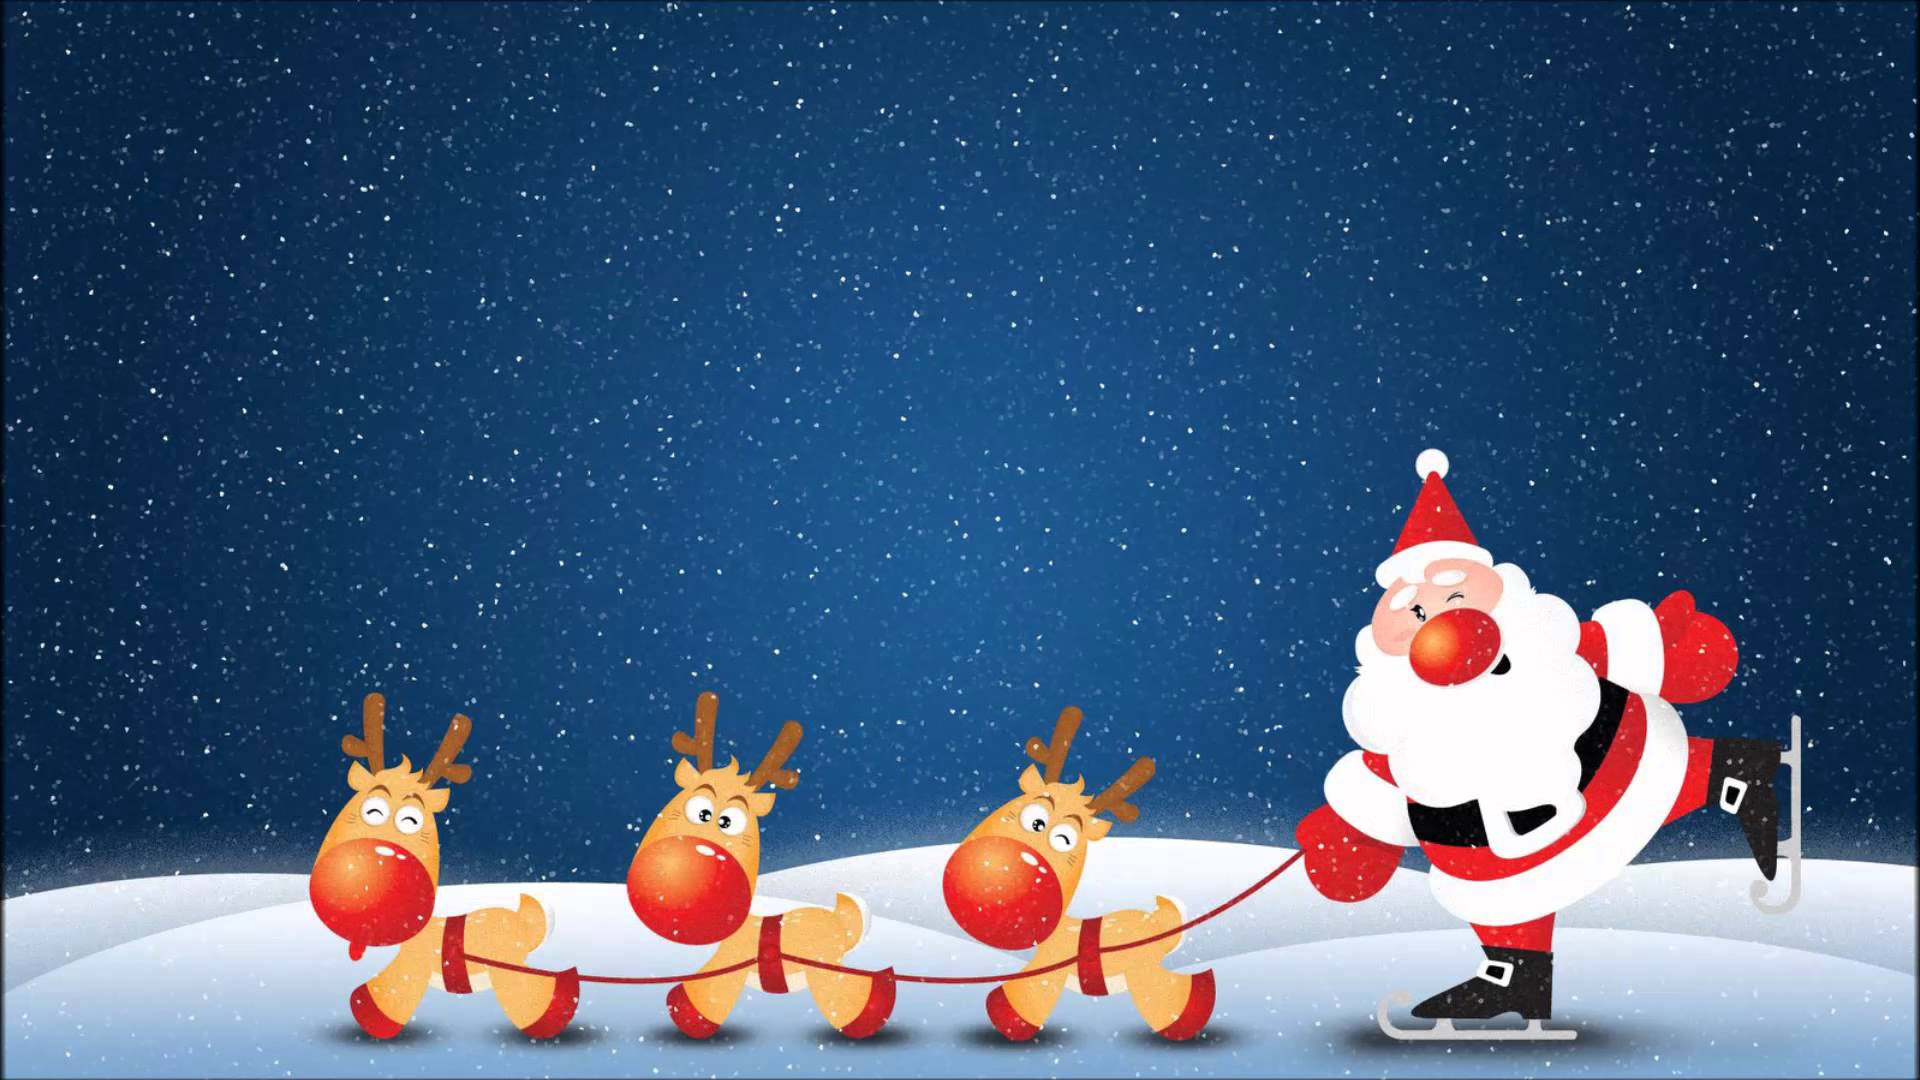 Rudolph The Red Nosed Reindeer Wallpaper Image